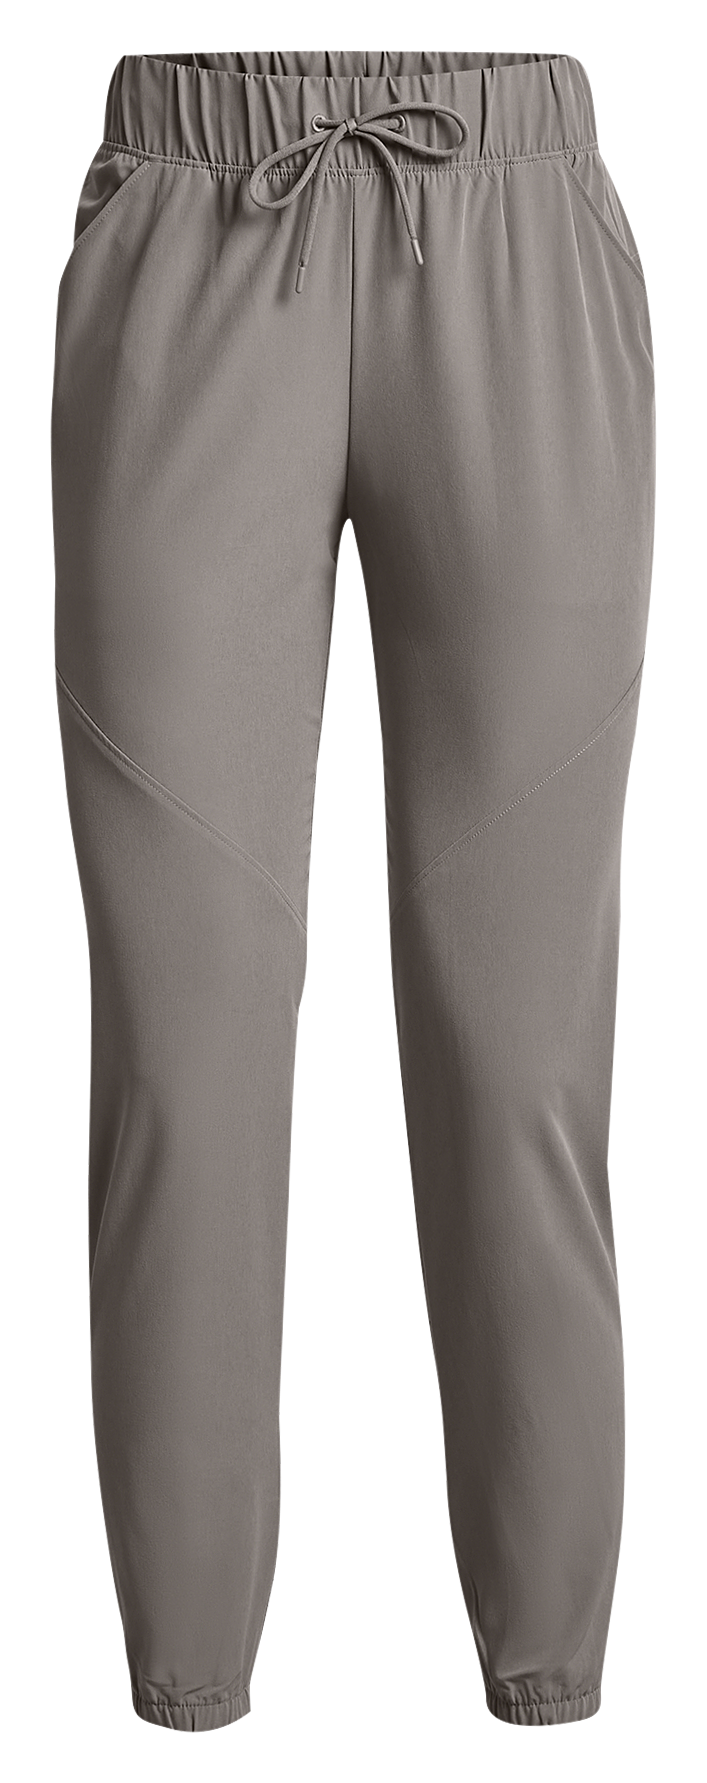 Under Armour Fusion Pants for Ladies - Black/Pitch Gray - M